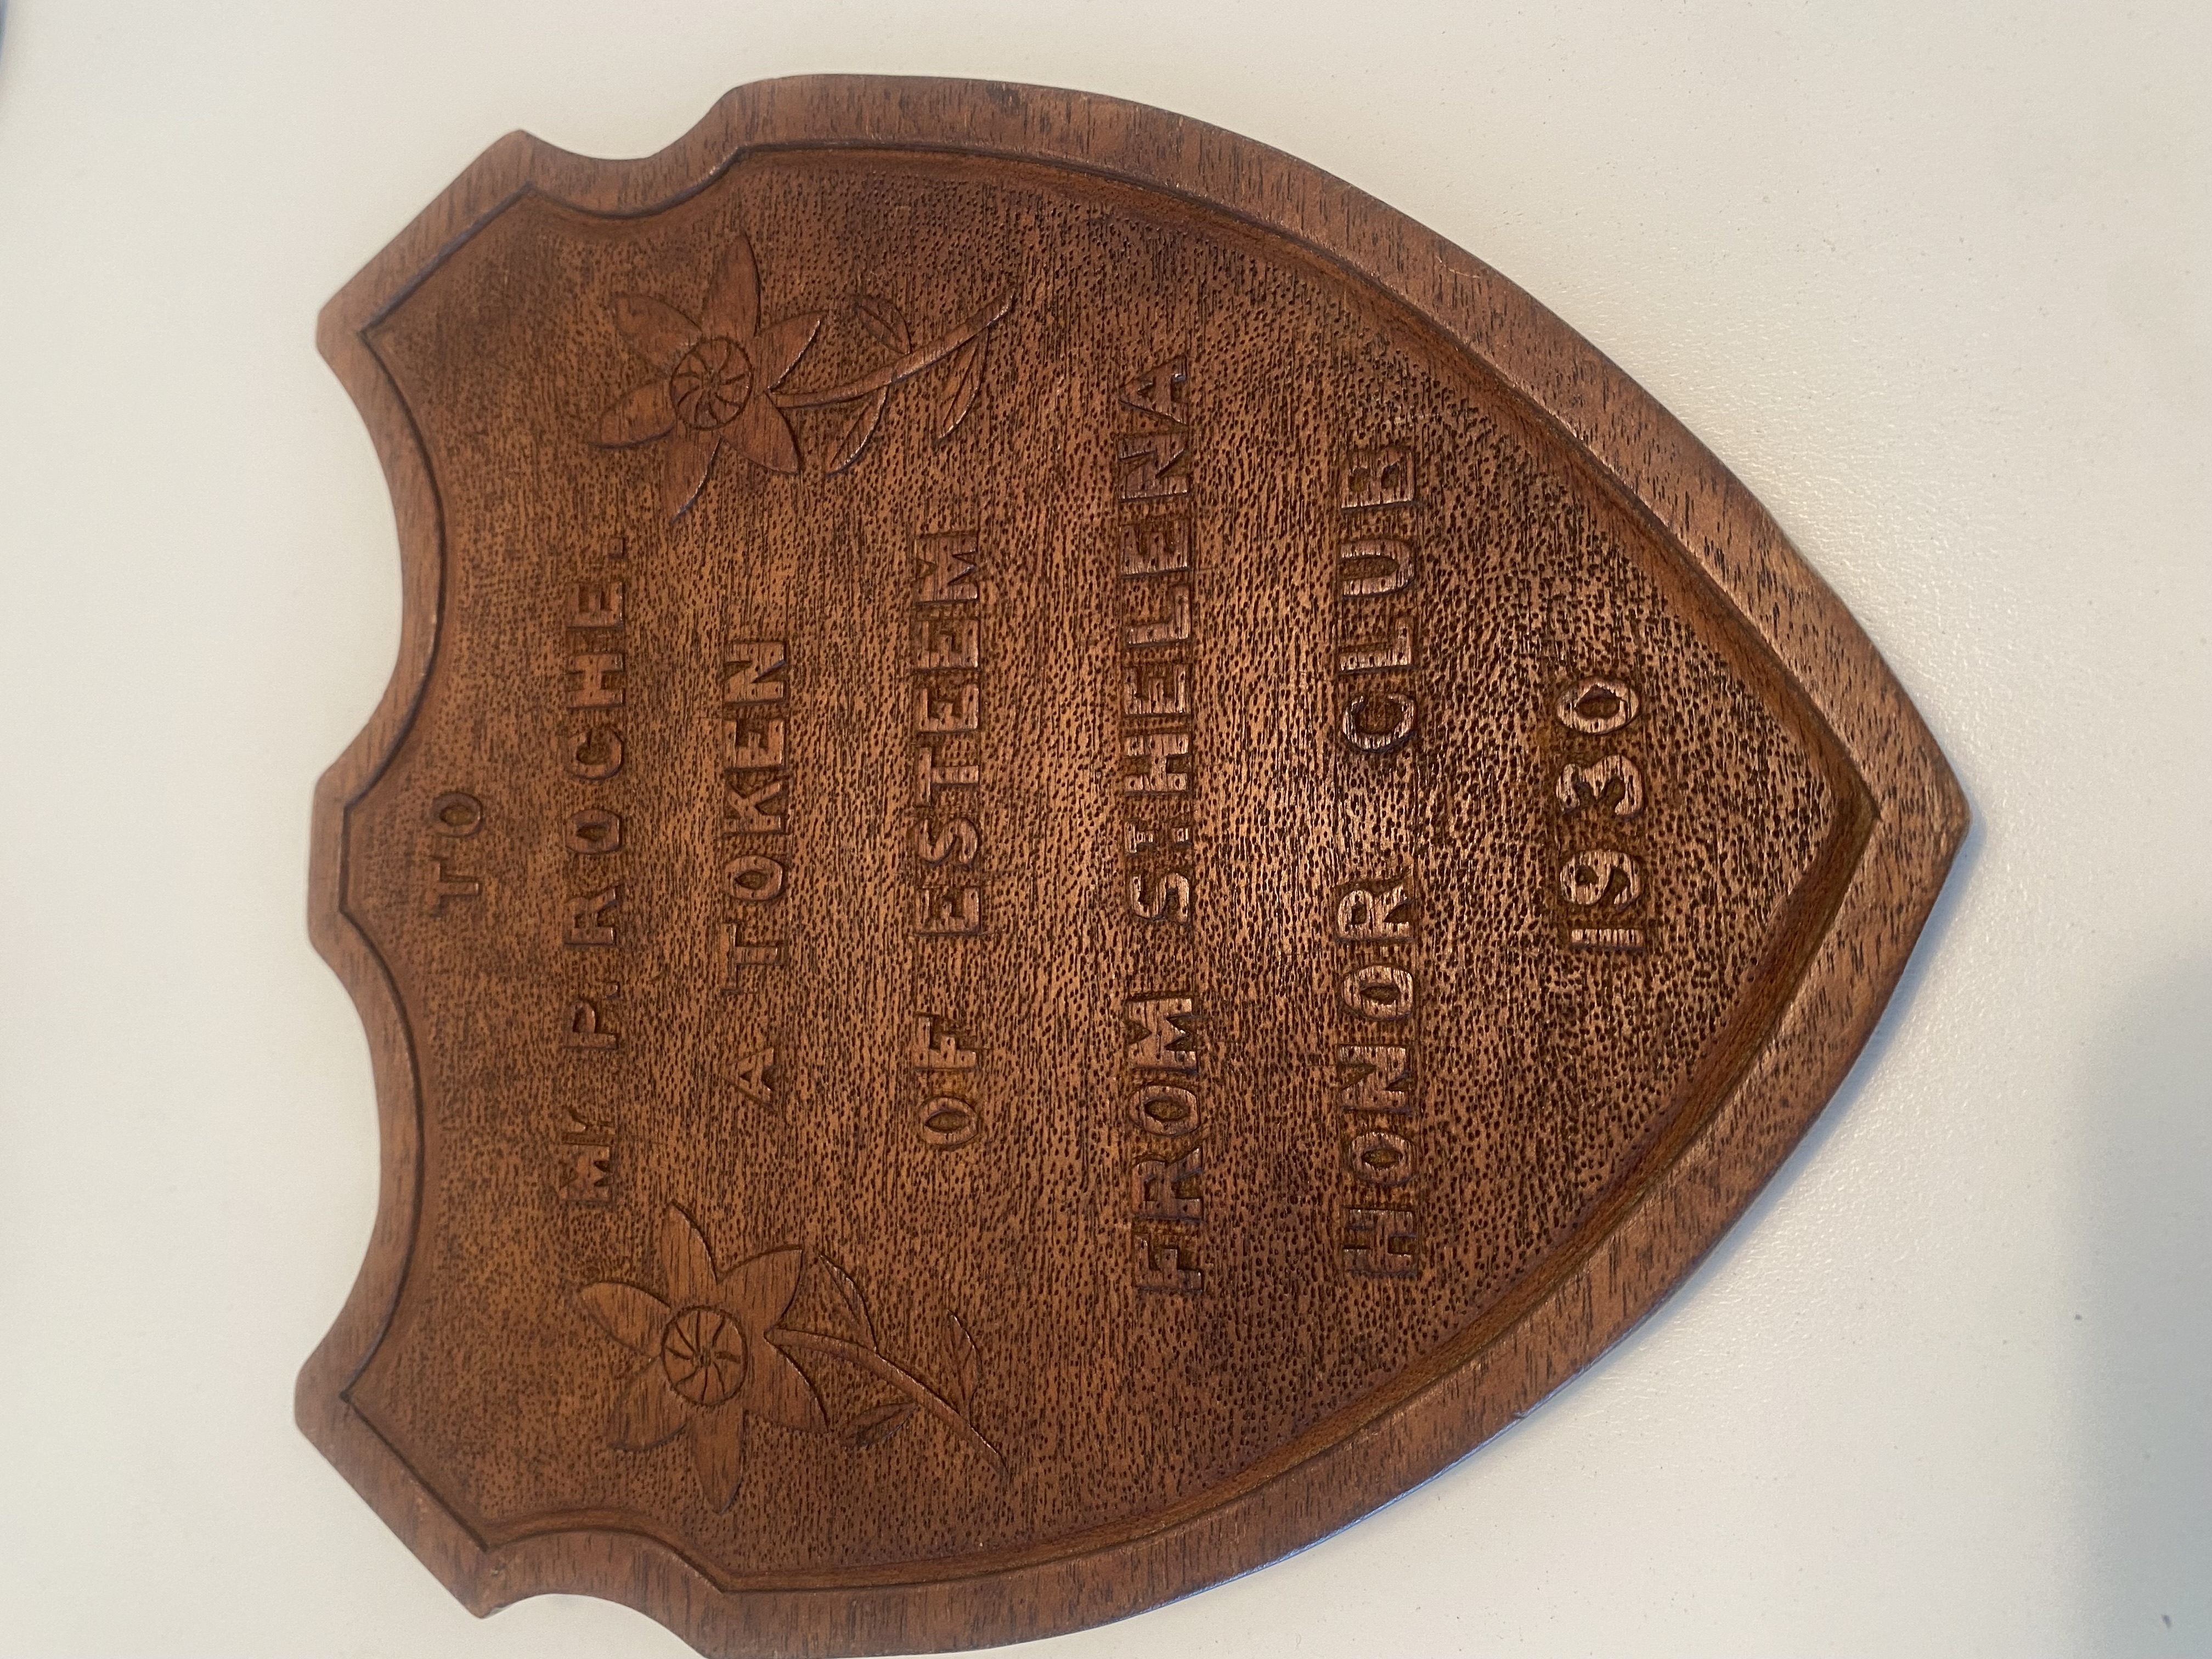 Wooden plaque with text “To Mr. Roche A Token of esteem from St Helena Honour Club 1930.